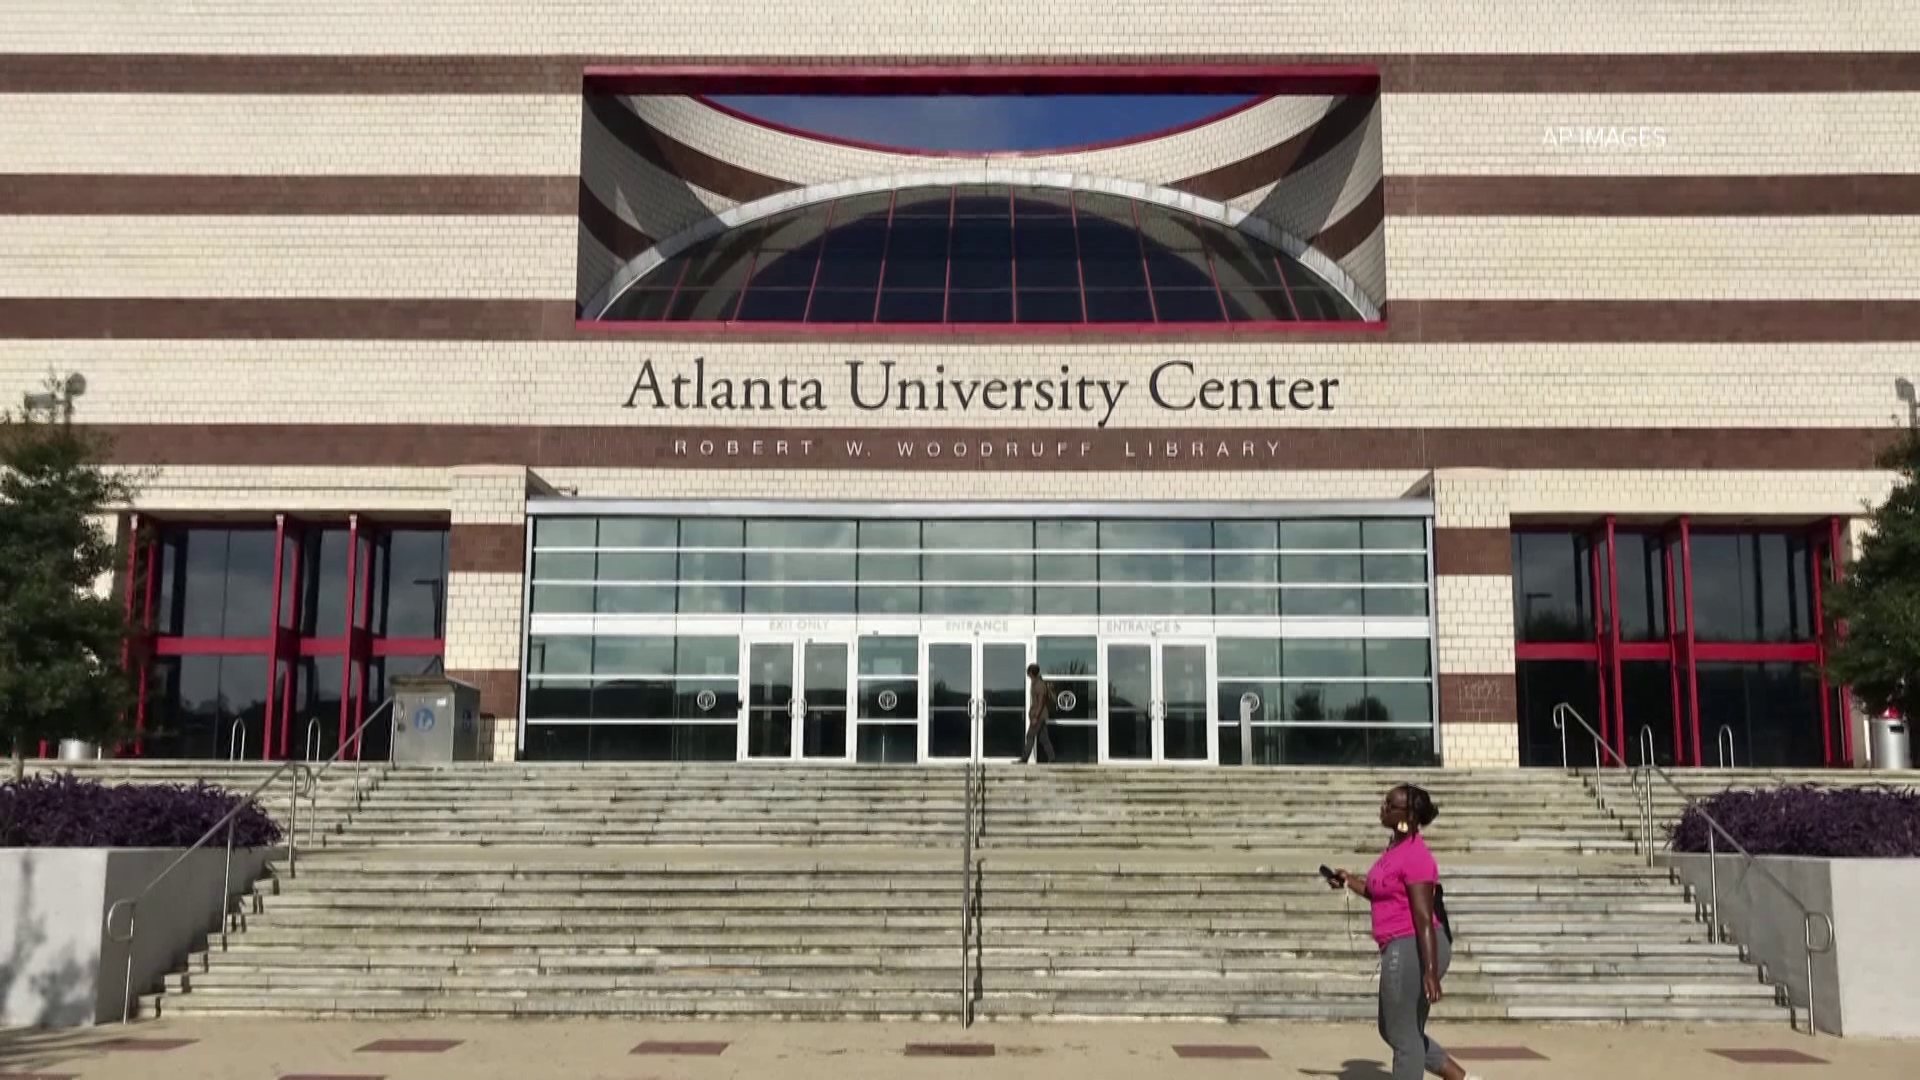 Schools within the Atlanta University Center Consortium and Emory University told their students they must get vaccinated, but not all students agree with the plan.